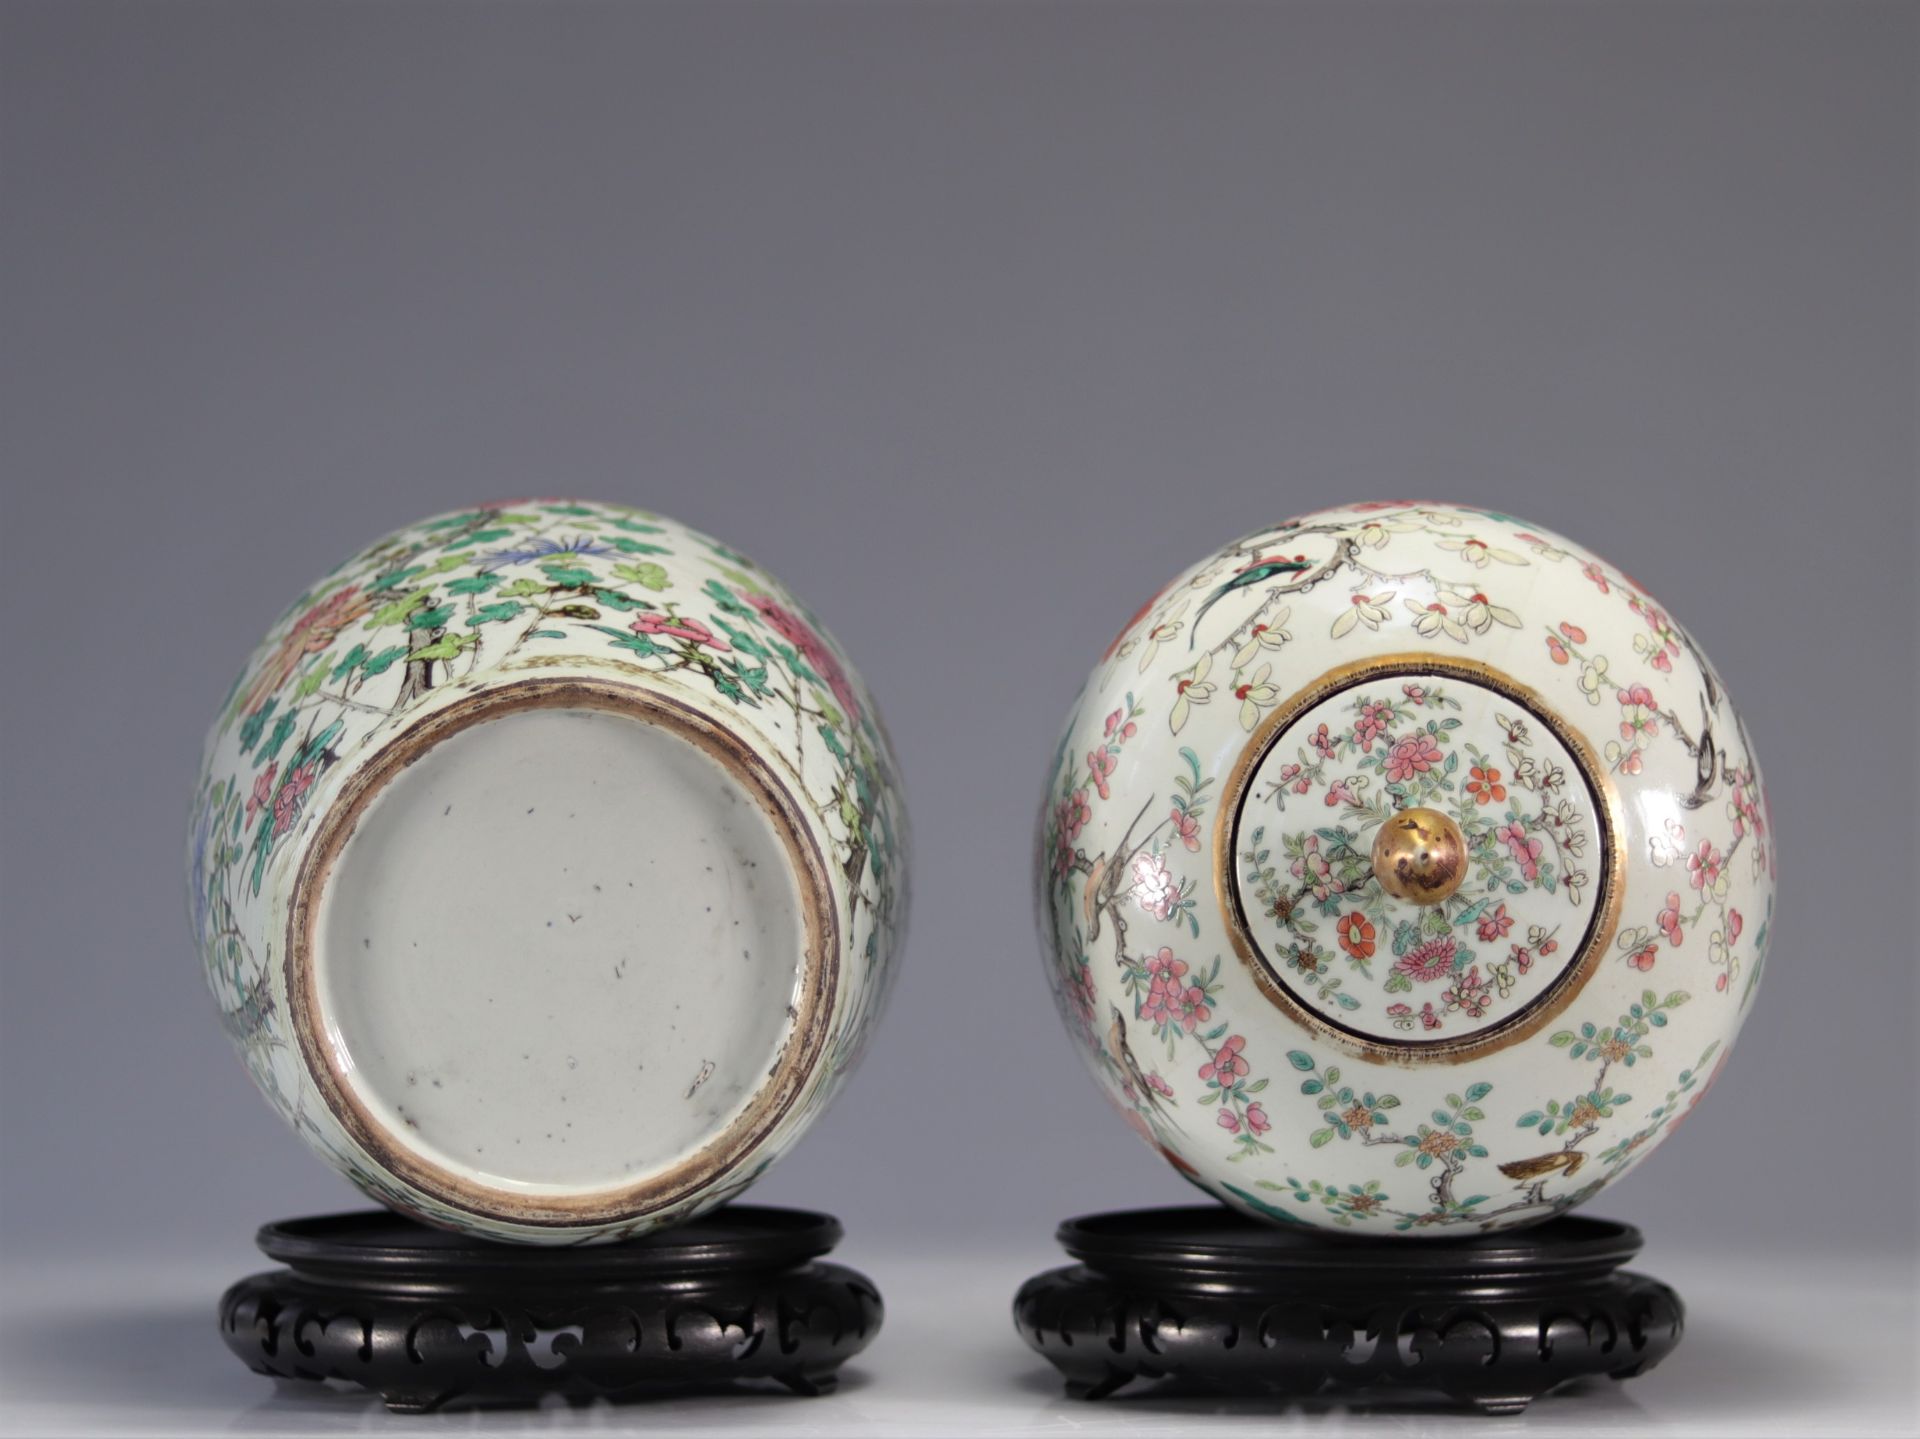 Pair of covered vases in famille rose porcelain with floral and bird decoration - Image 5 of 5